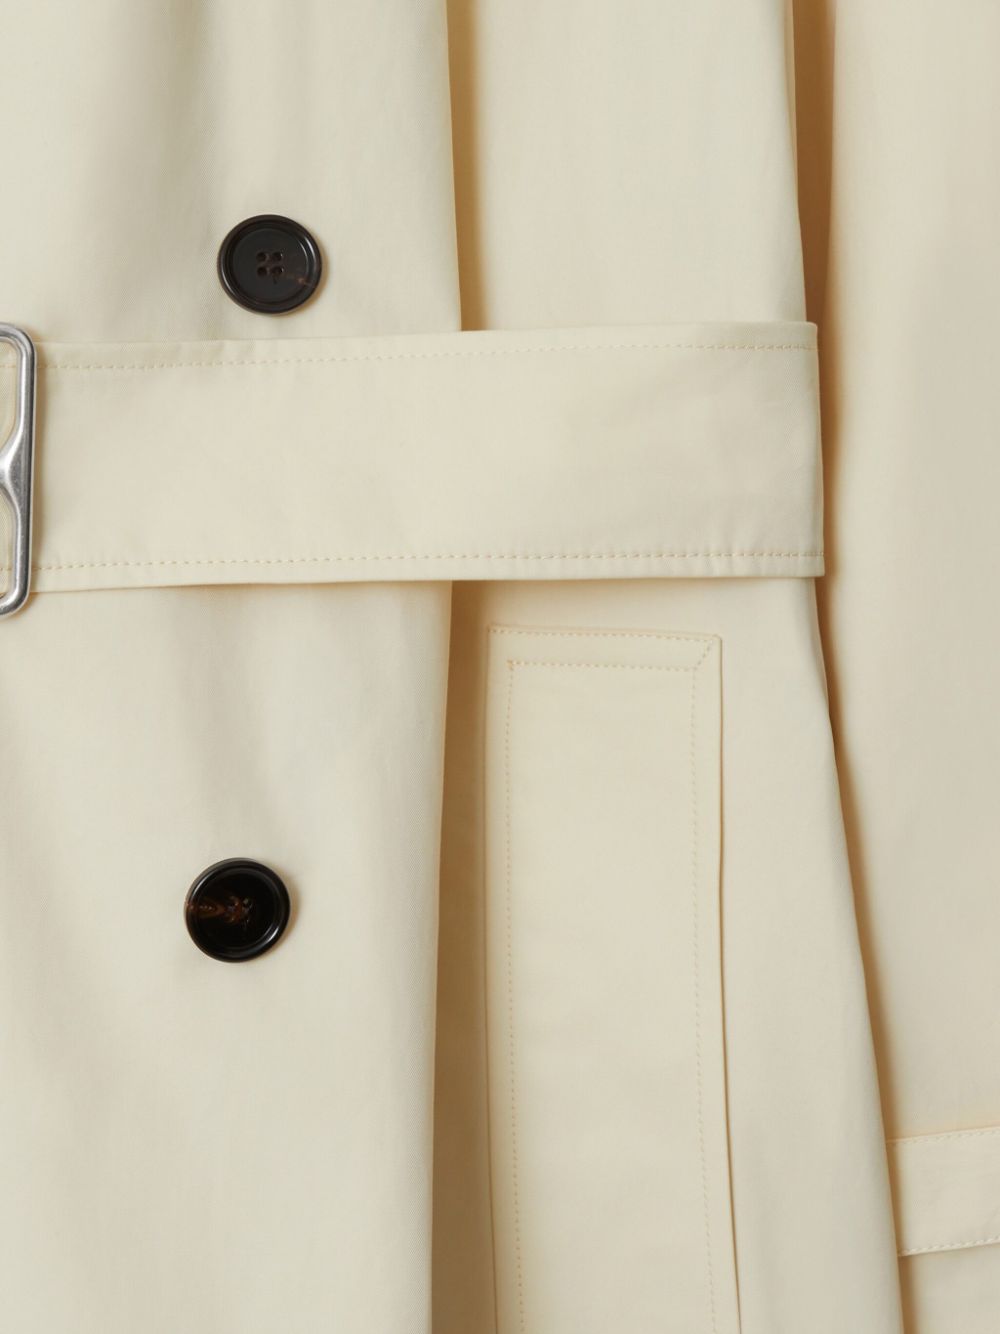 Shop Burberry Classic White Cotton Belted Jacket For Women